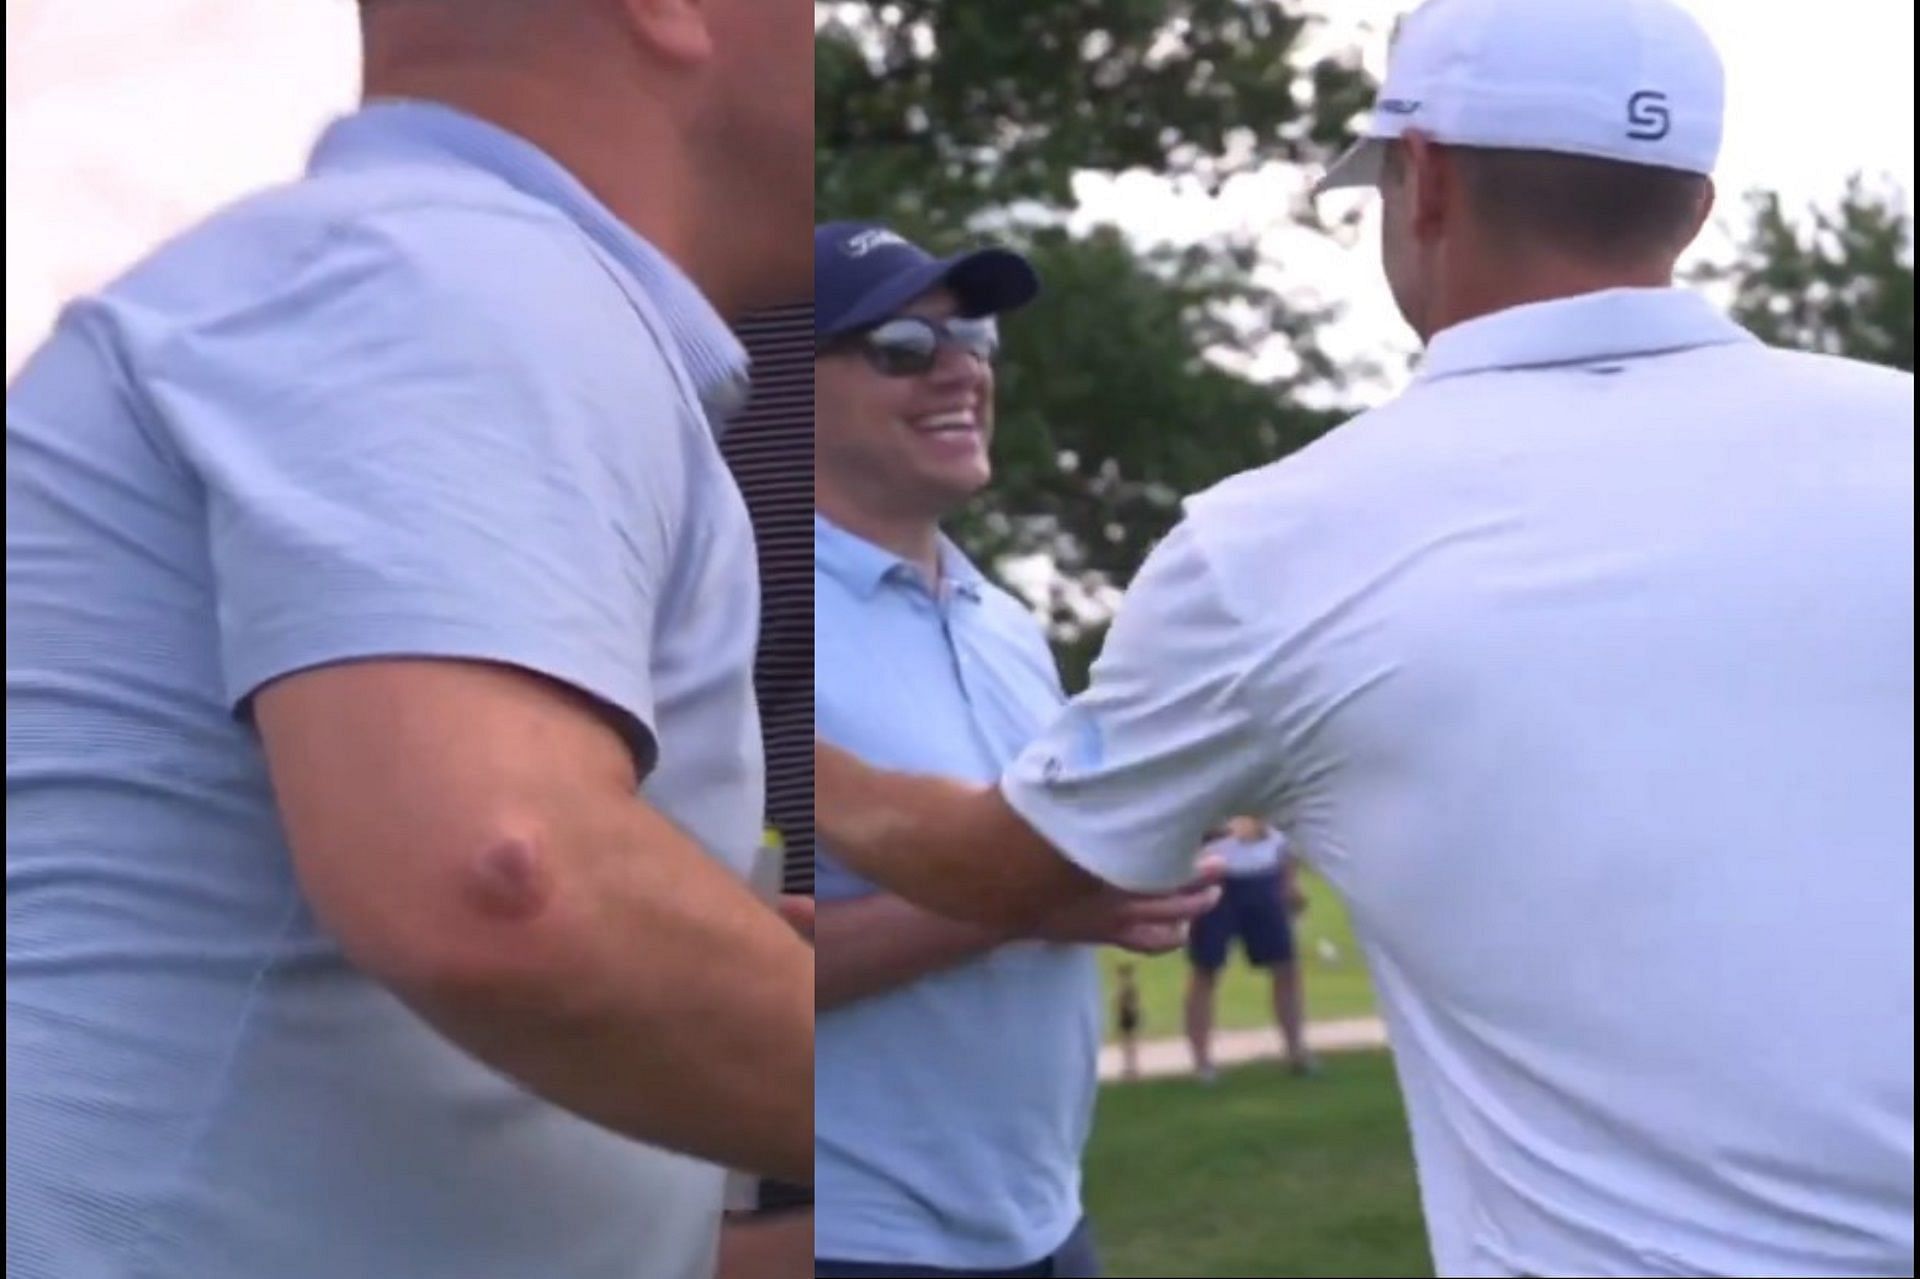 Jordan Spieth meets fan after his tee shot accidentally hit his elbow during the CJ Cup Byron Nelson, Round 2